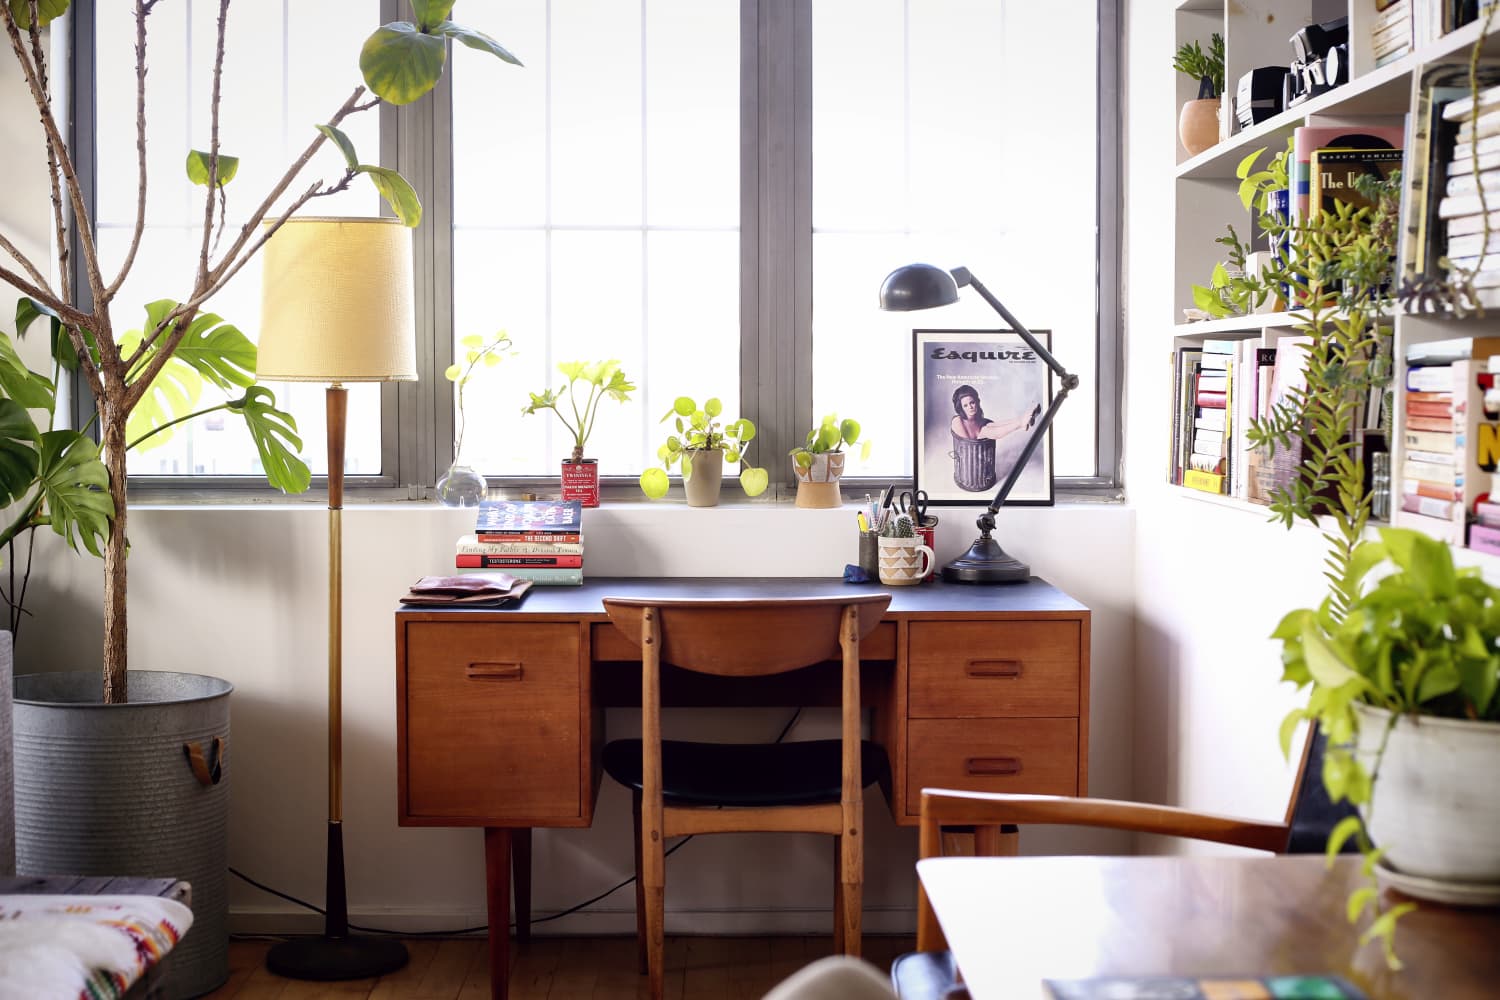 11 Things Everyone Should Have Somewhere in Their Home Office